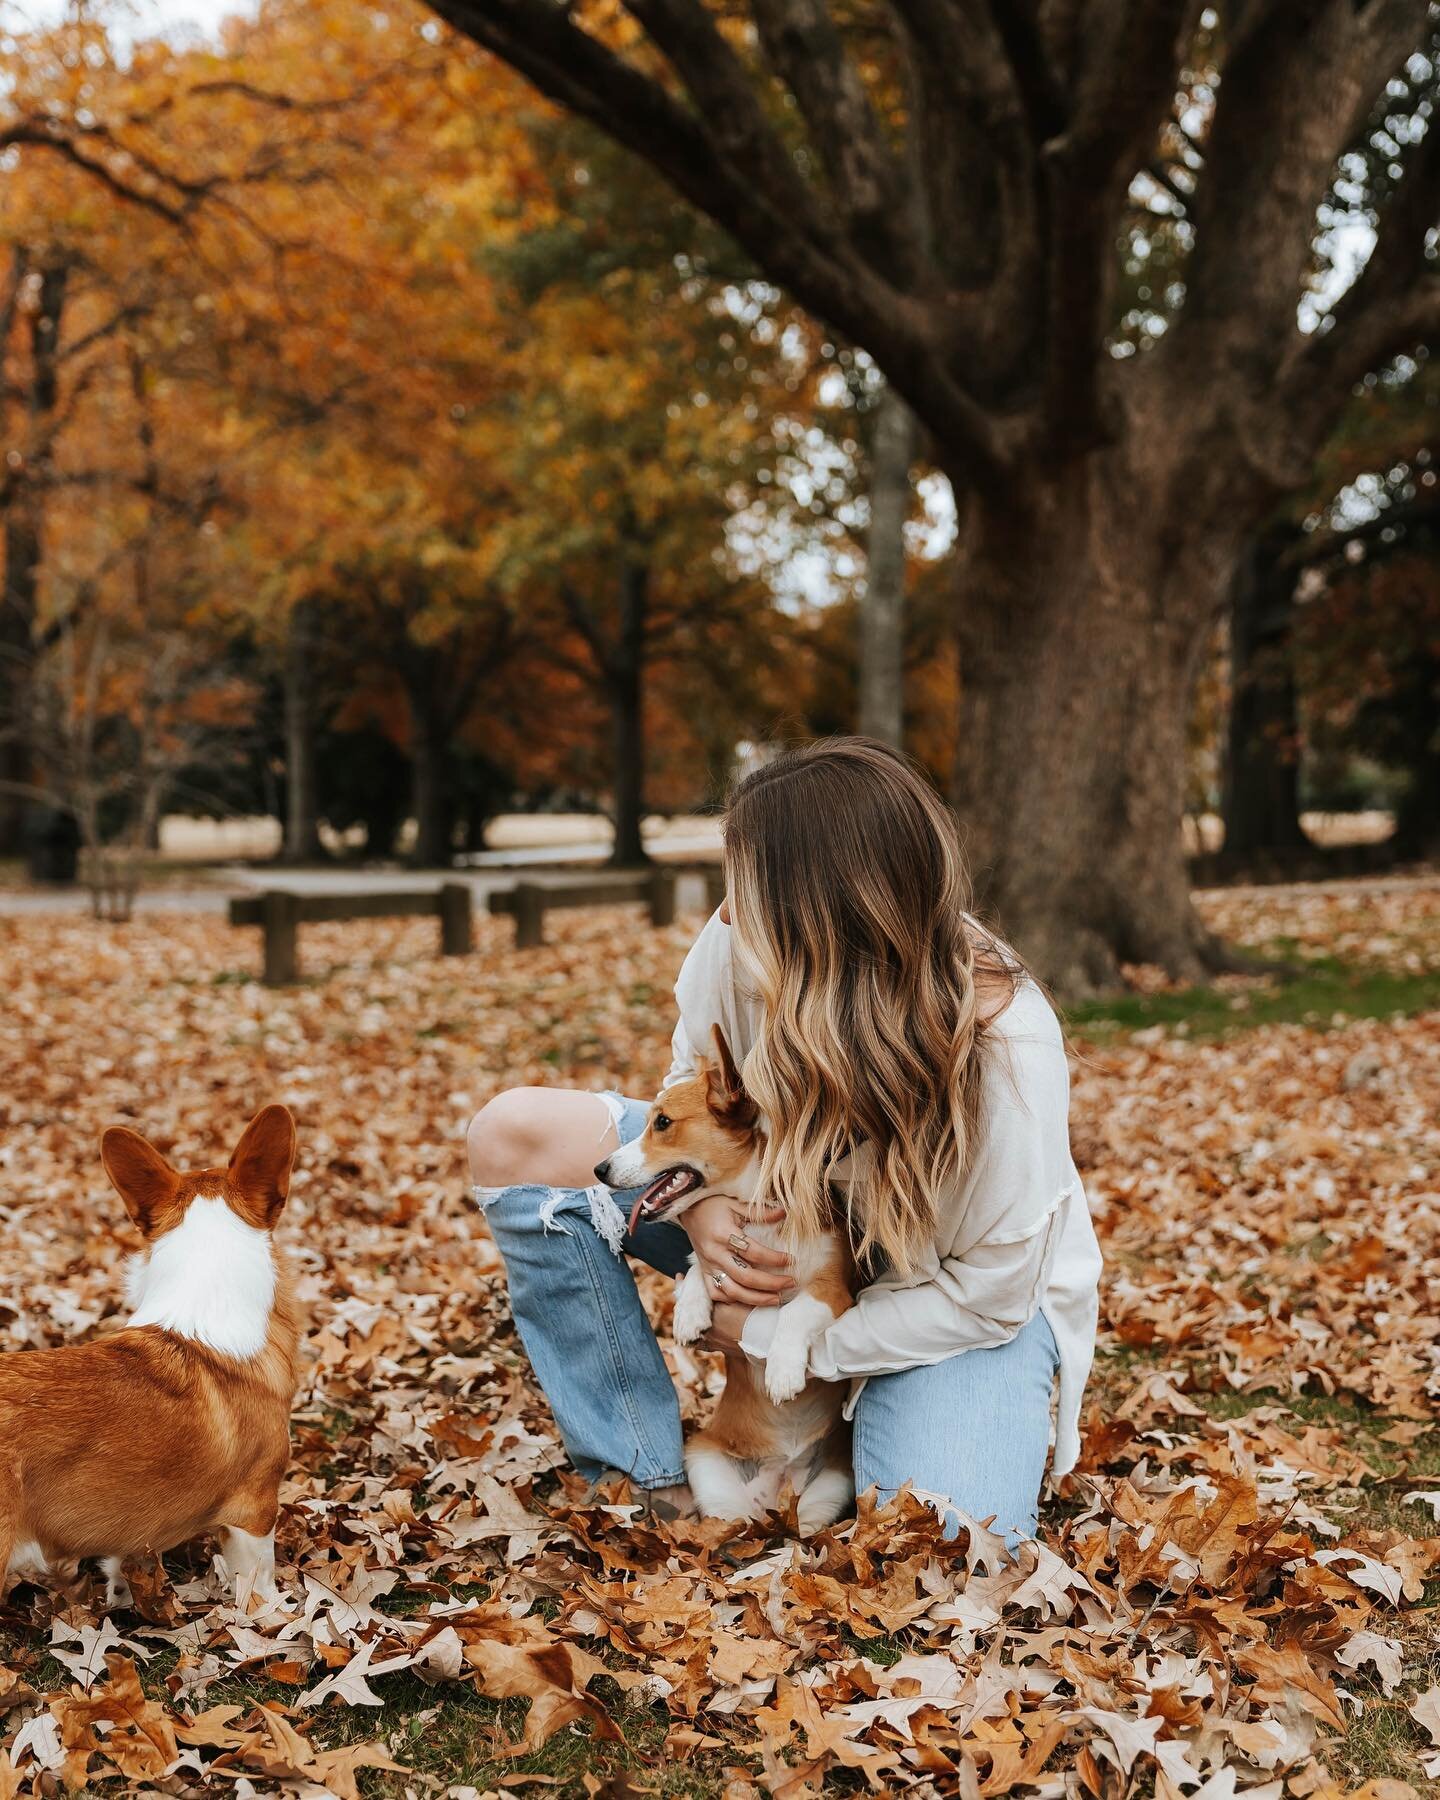 Visited my fav @lindseyfordphotography this weekend and finally got some pics with my babies!!! We are soaking in the last bit of fall down south 🍁🍂

📸: @lindseyfordphotography 
Edit: me